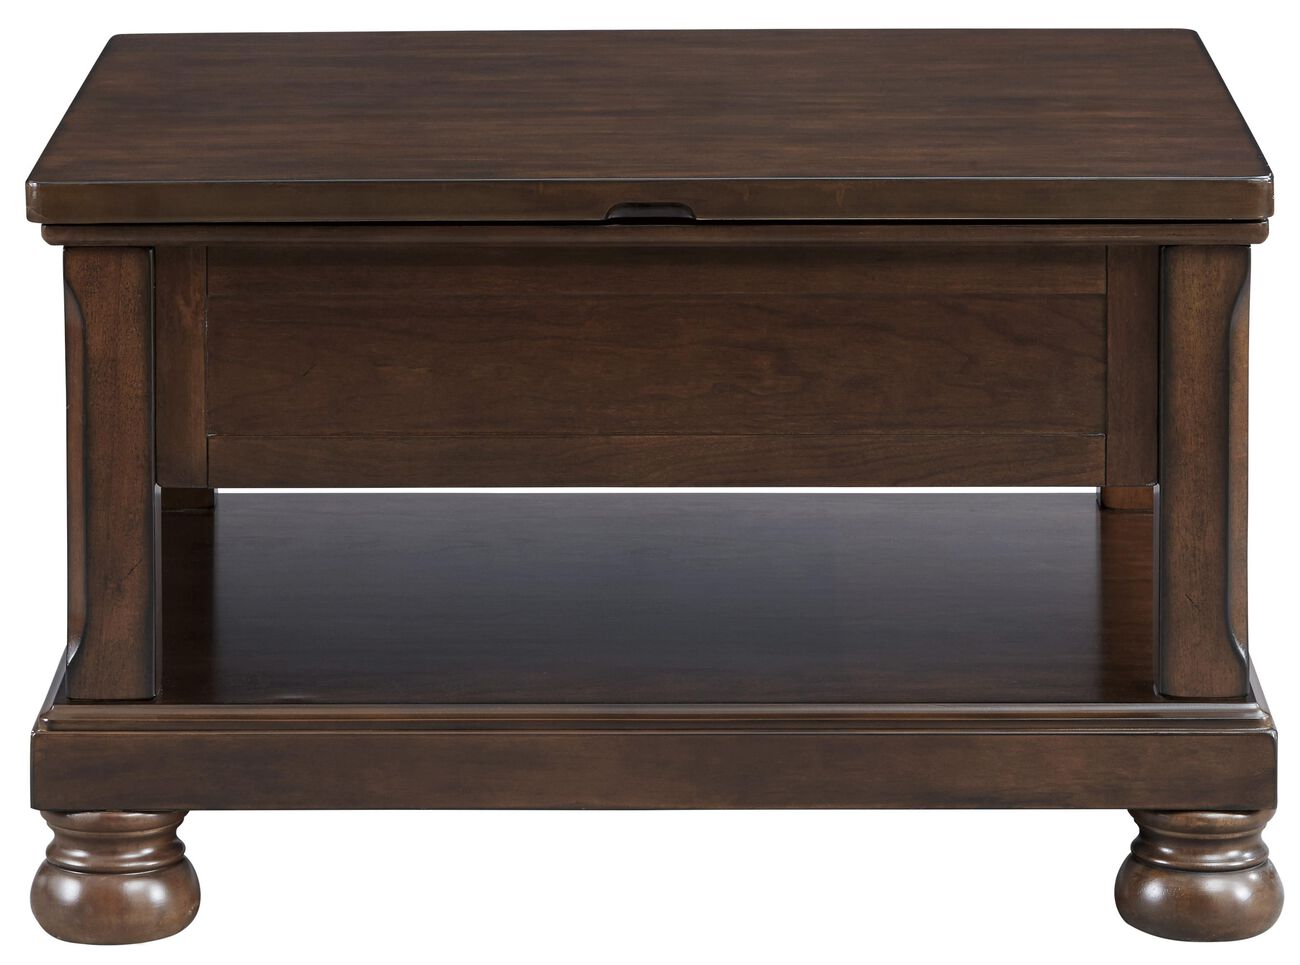 Lift Top Cocktail Table with Open Bottom Shelf and Bun Feet, Brown